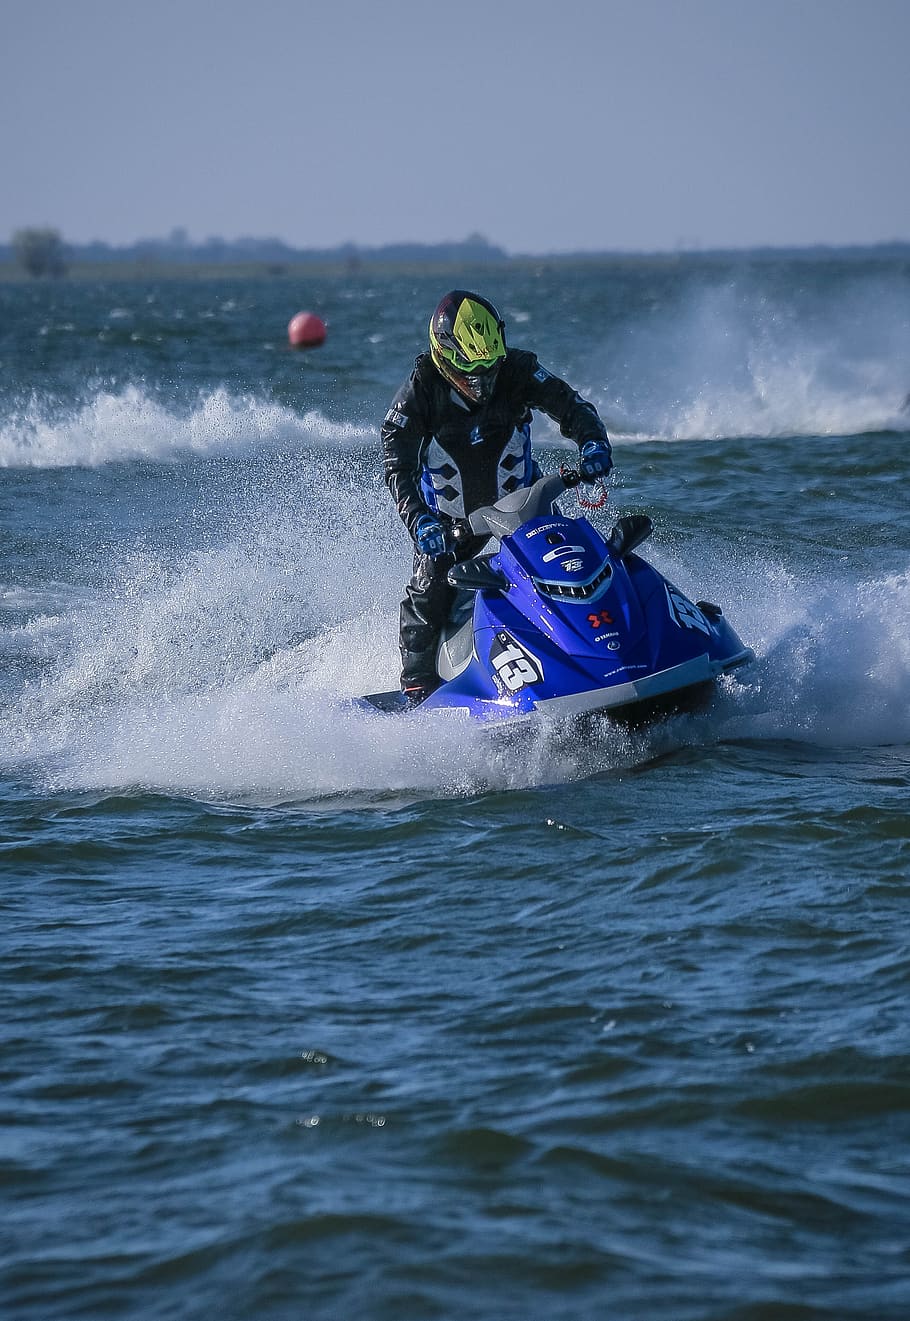 jet ski, water, sport, extreme, sea, speed, the activity, action, ocean, race